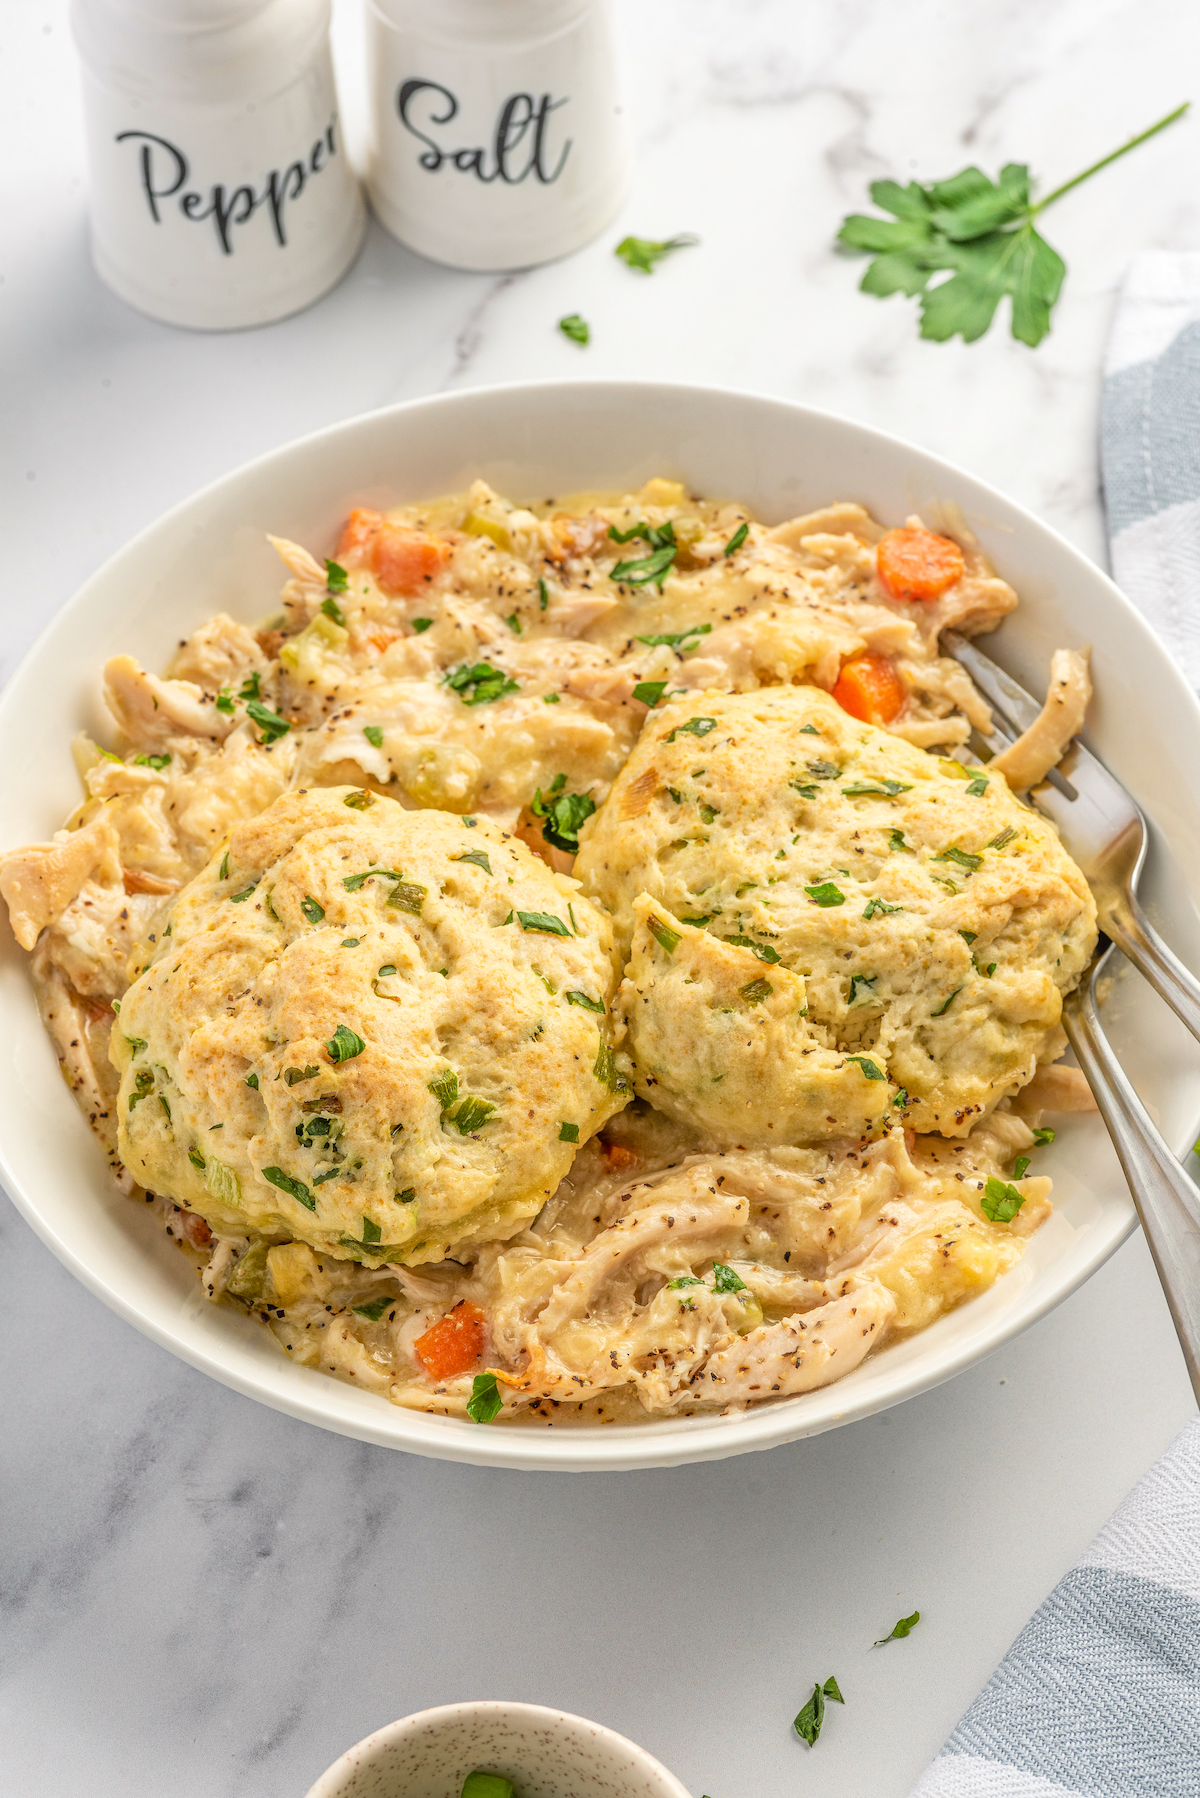 A bowl of creamy chicken and vegetables with biscuits.